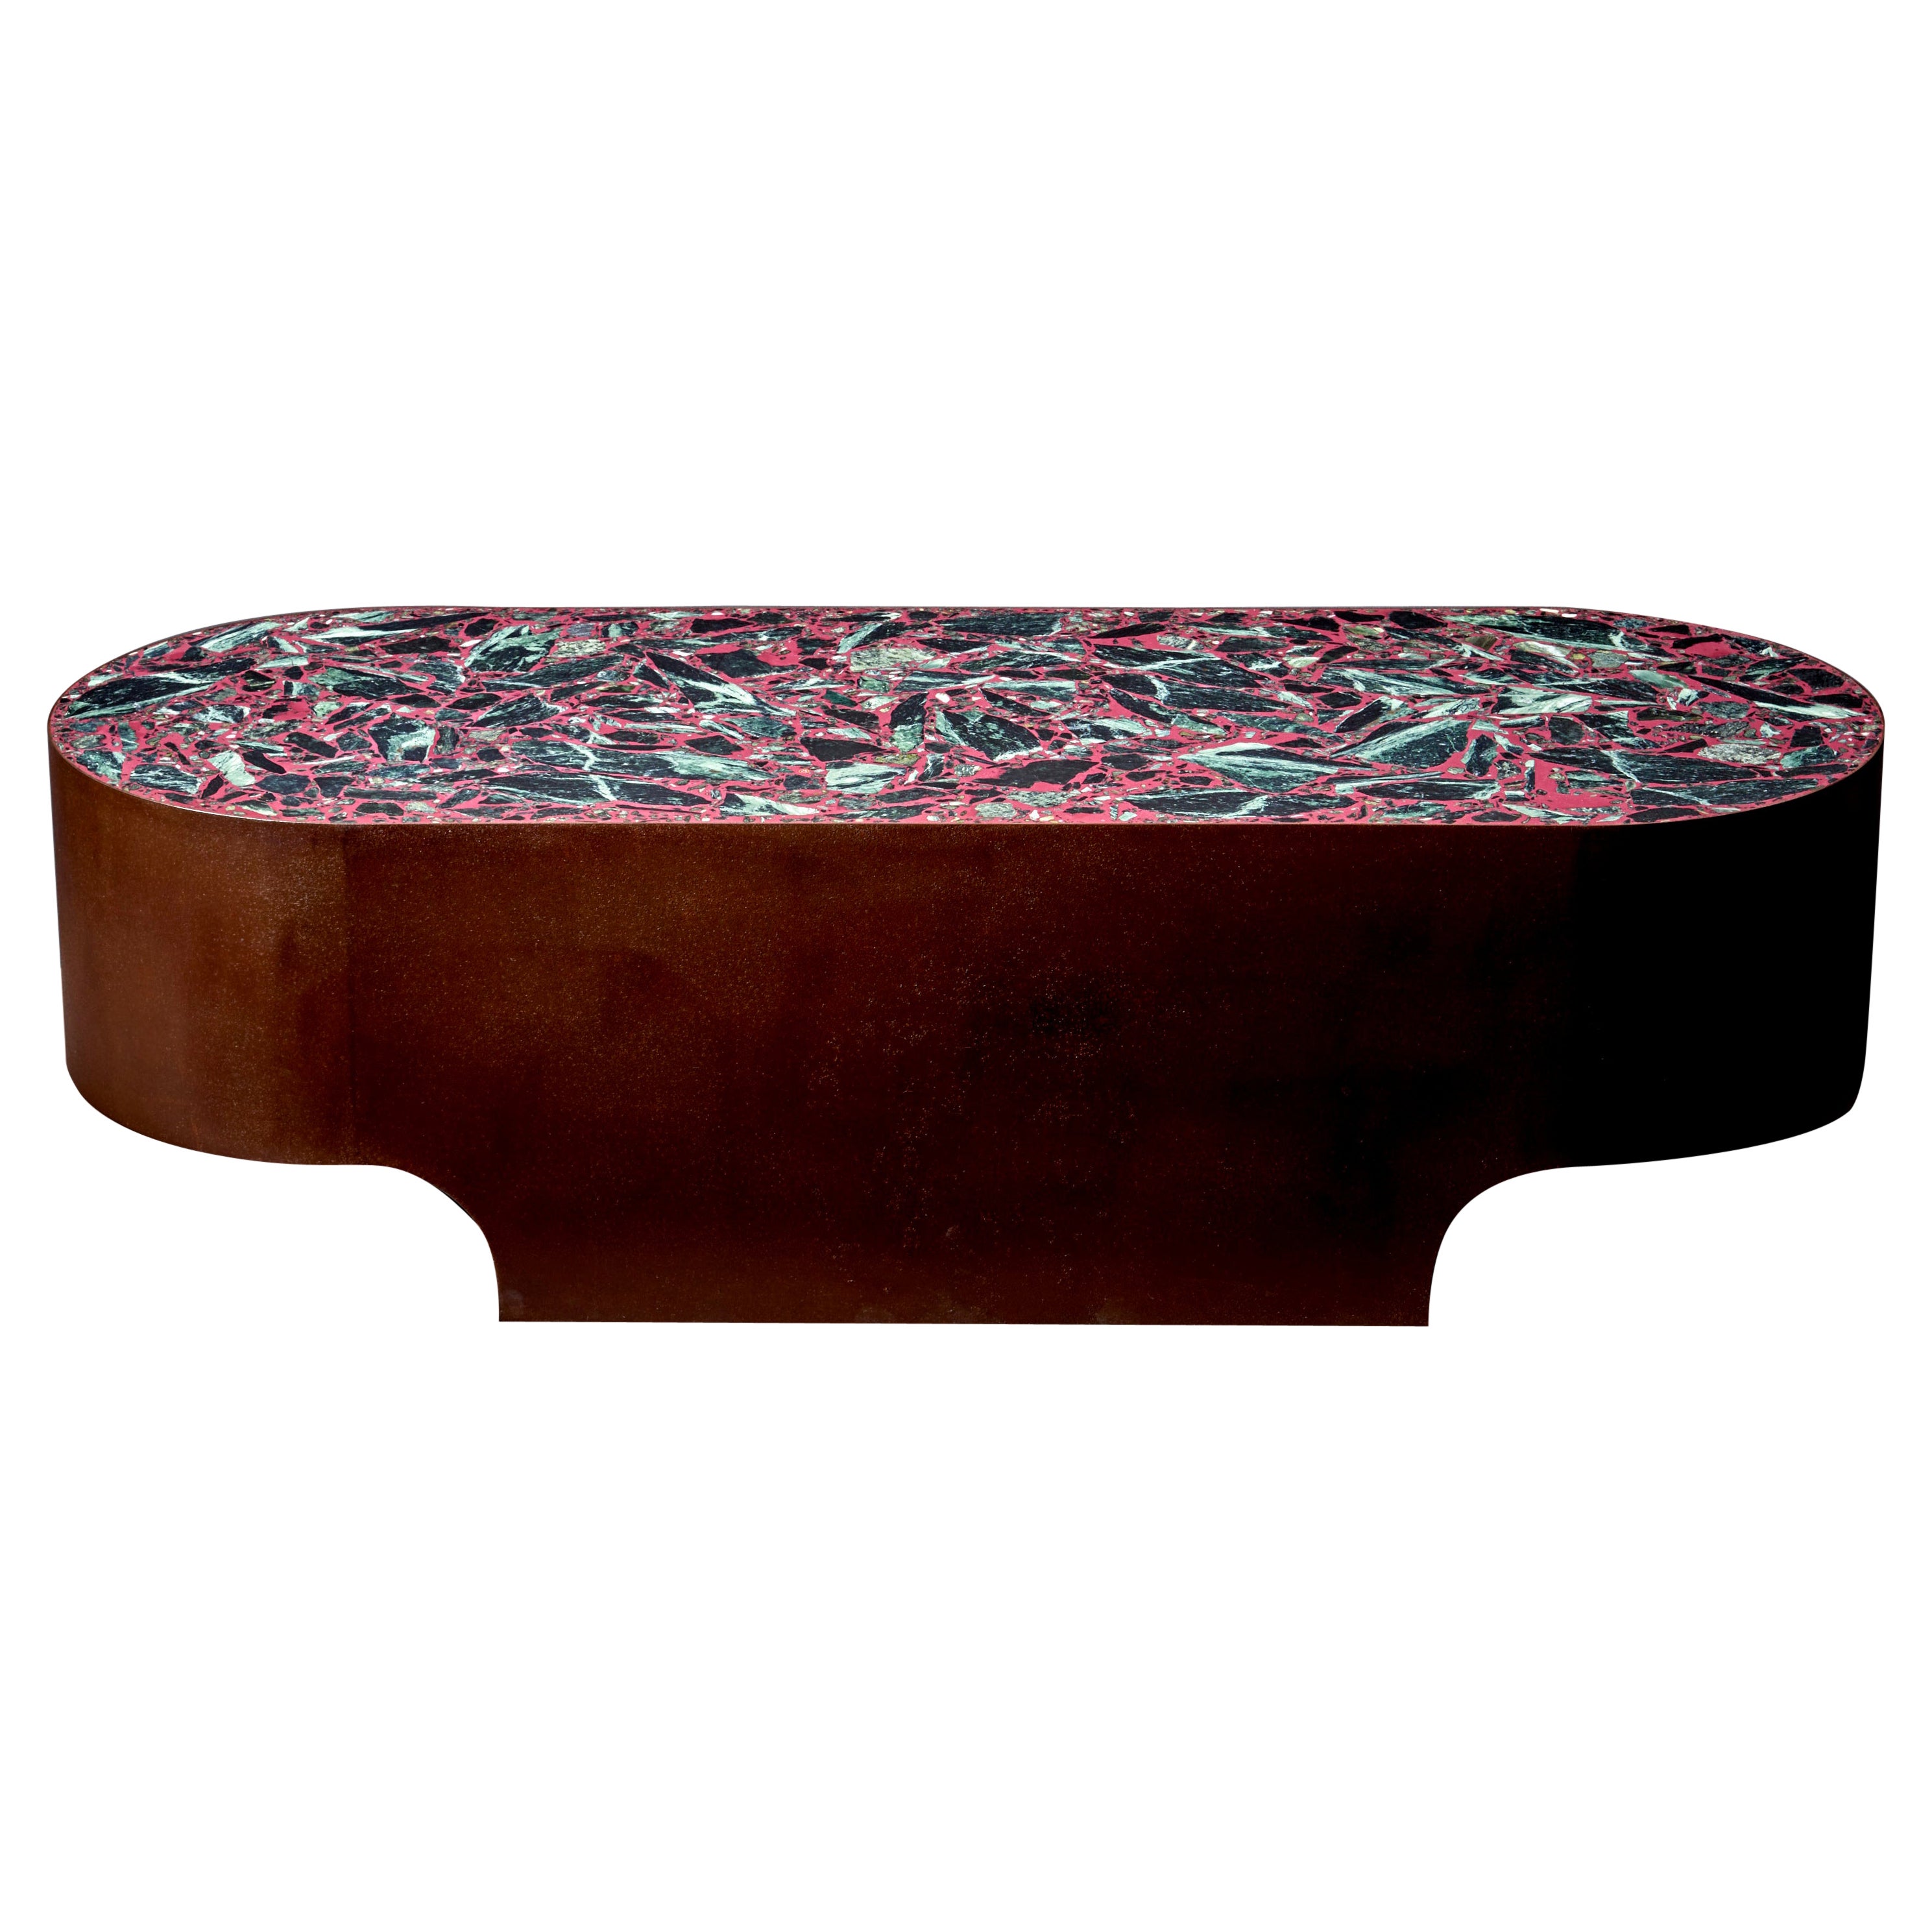 Handcrafted Felix Muhrhofer Terrazzo Coffee Table 'Cardinal Jeanne'